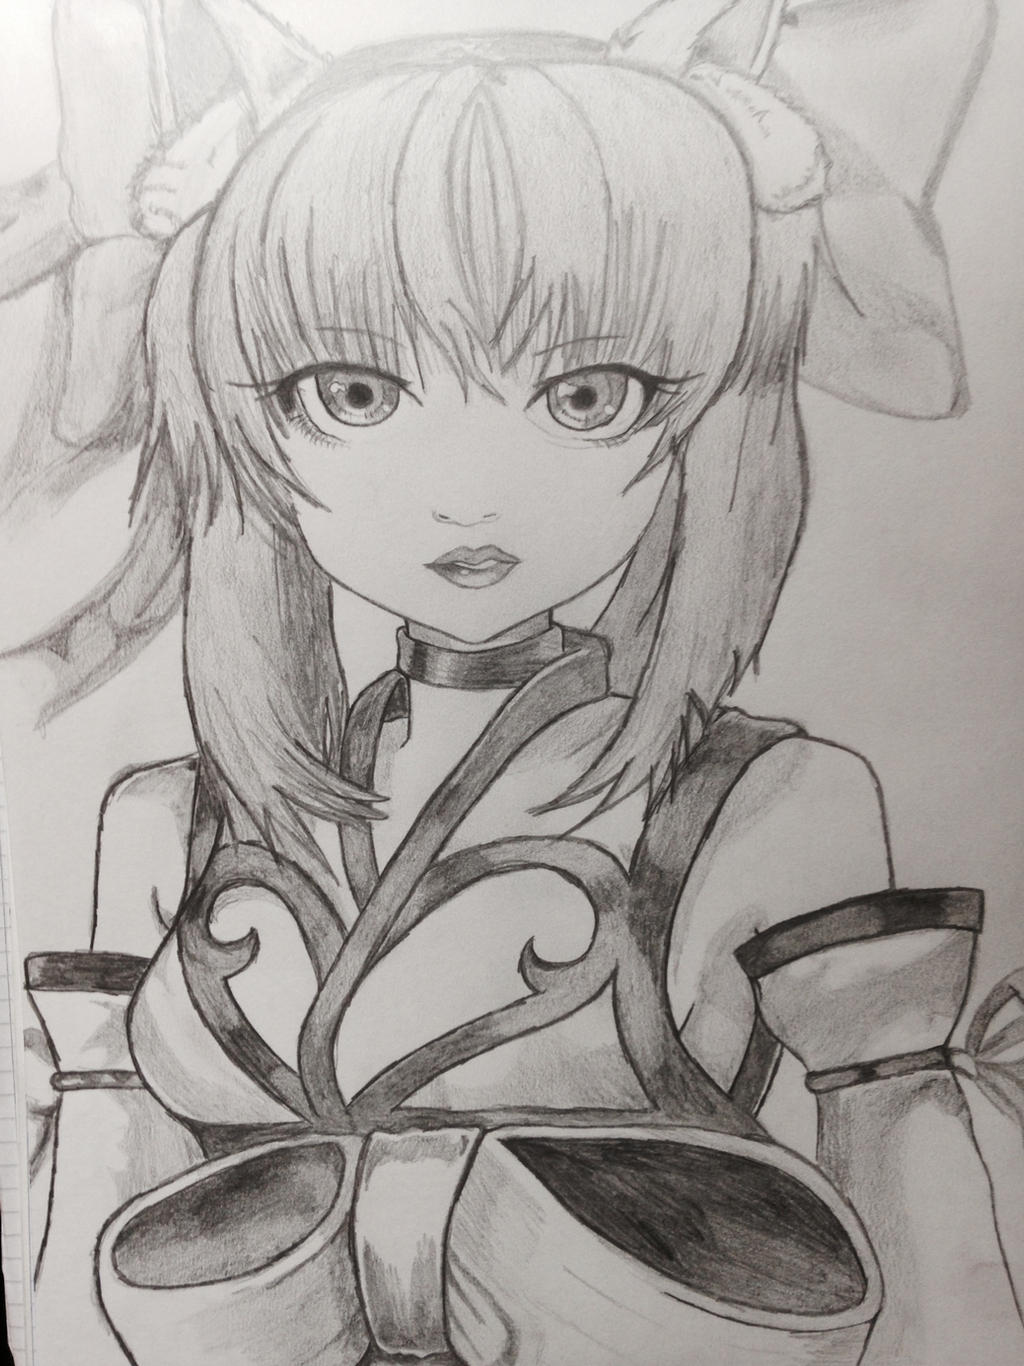 Anime/ Manga Sketchbook drawing (pencil) by JillValentine007 on